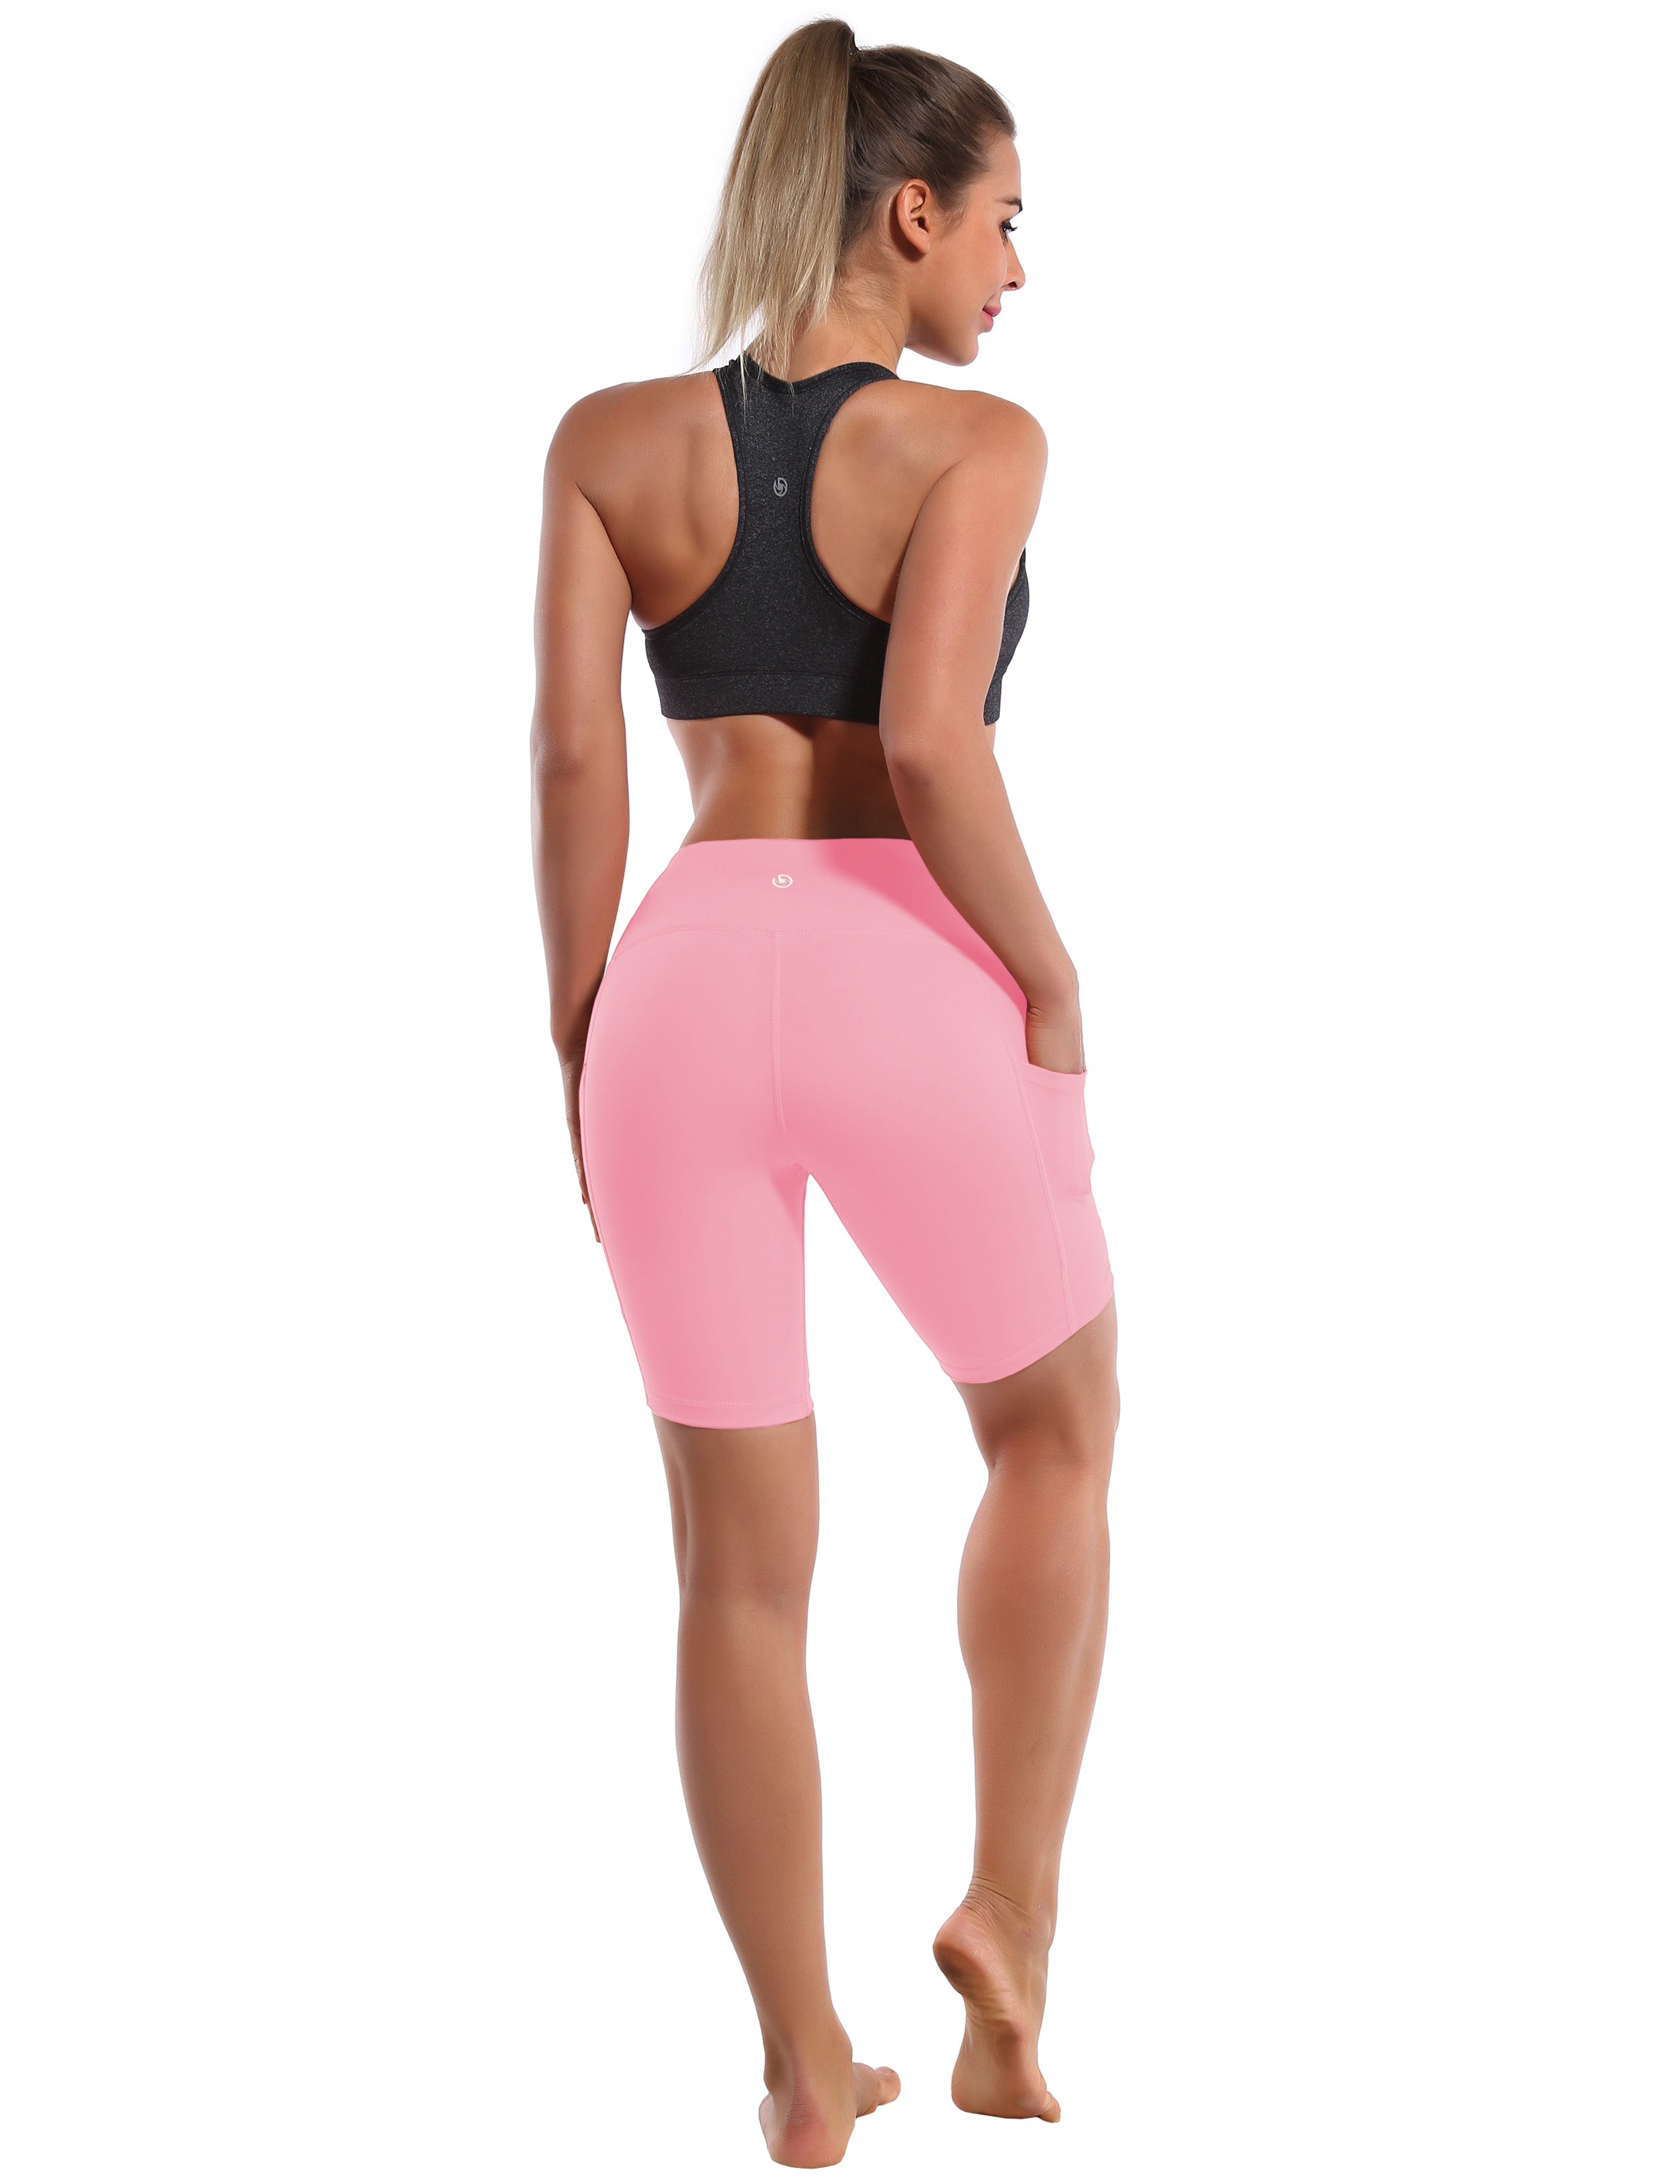 8" Side Pockets yogastudio Shorts lemonadepink Sleek, soft, smooth and totally comfortable: our newest style is here. Softest-ever fabric High elasticity High density 4-way stretch Fabric doesn't attract lint easily No see-through Moisture-wicking Machine wash 75% Nylon, 25% Spandex